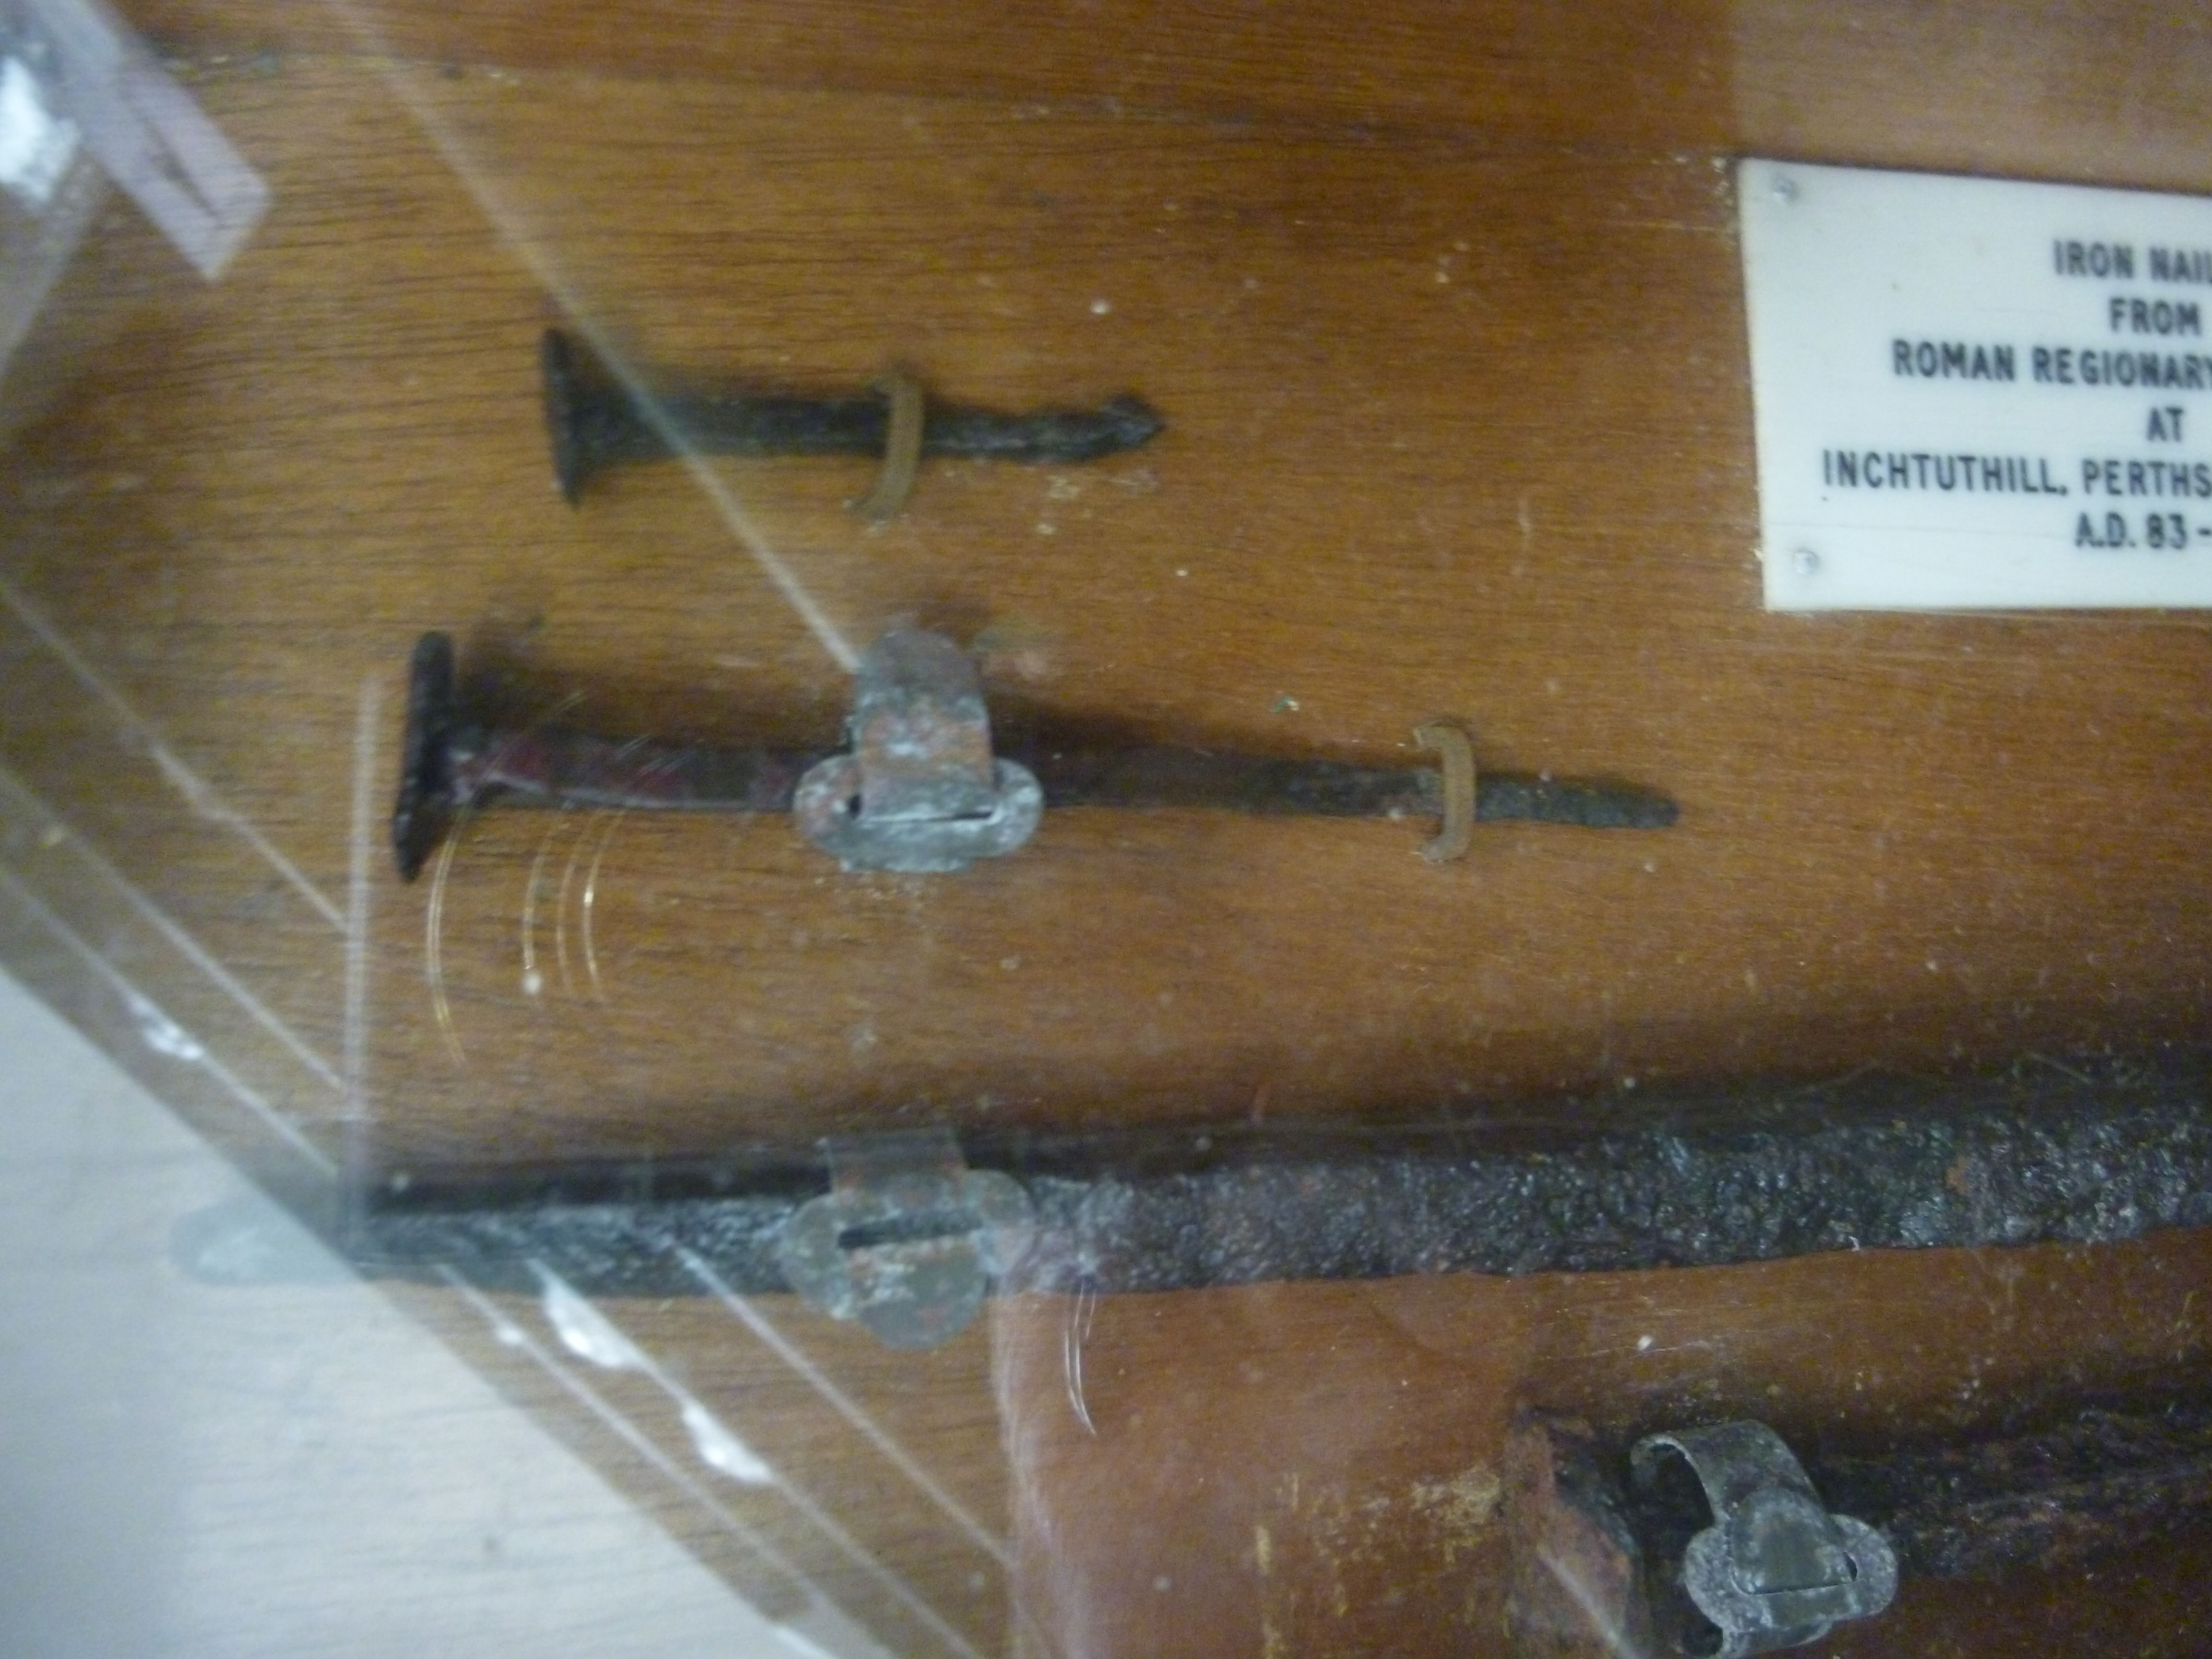 A display of iron nails purported to have come from a Roman Regionary Fortress at Inchtuthill, - Image 2 of 2